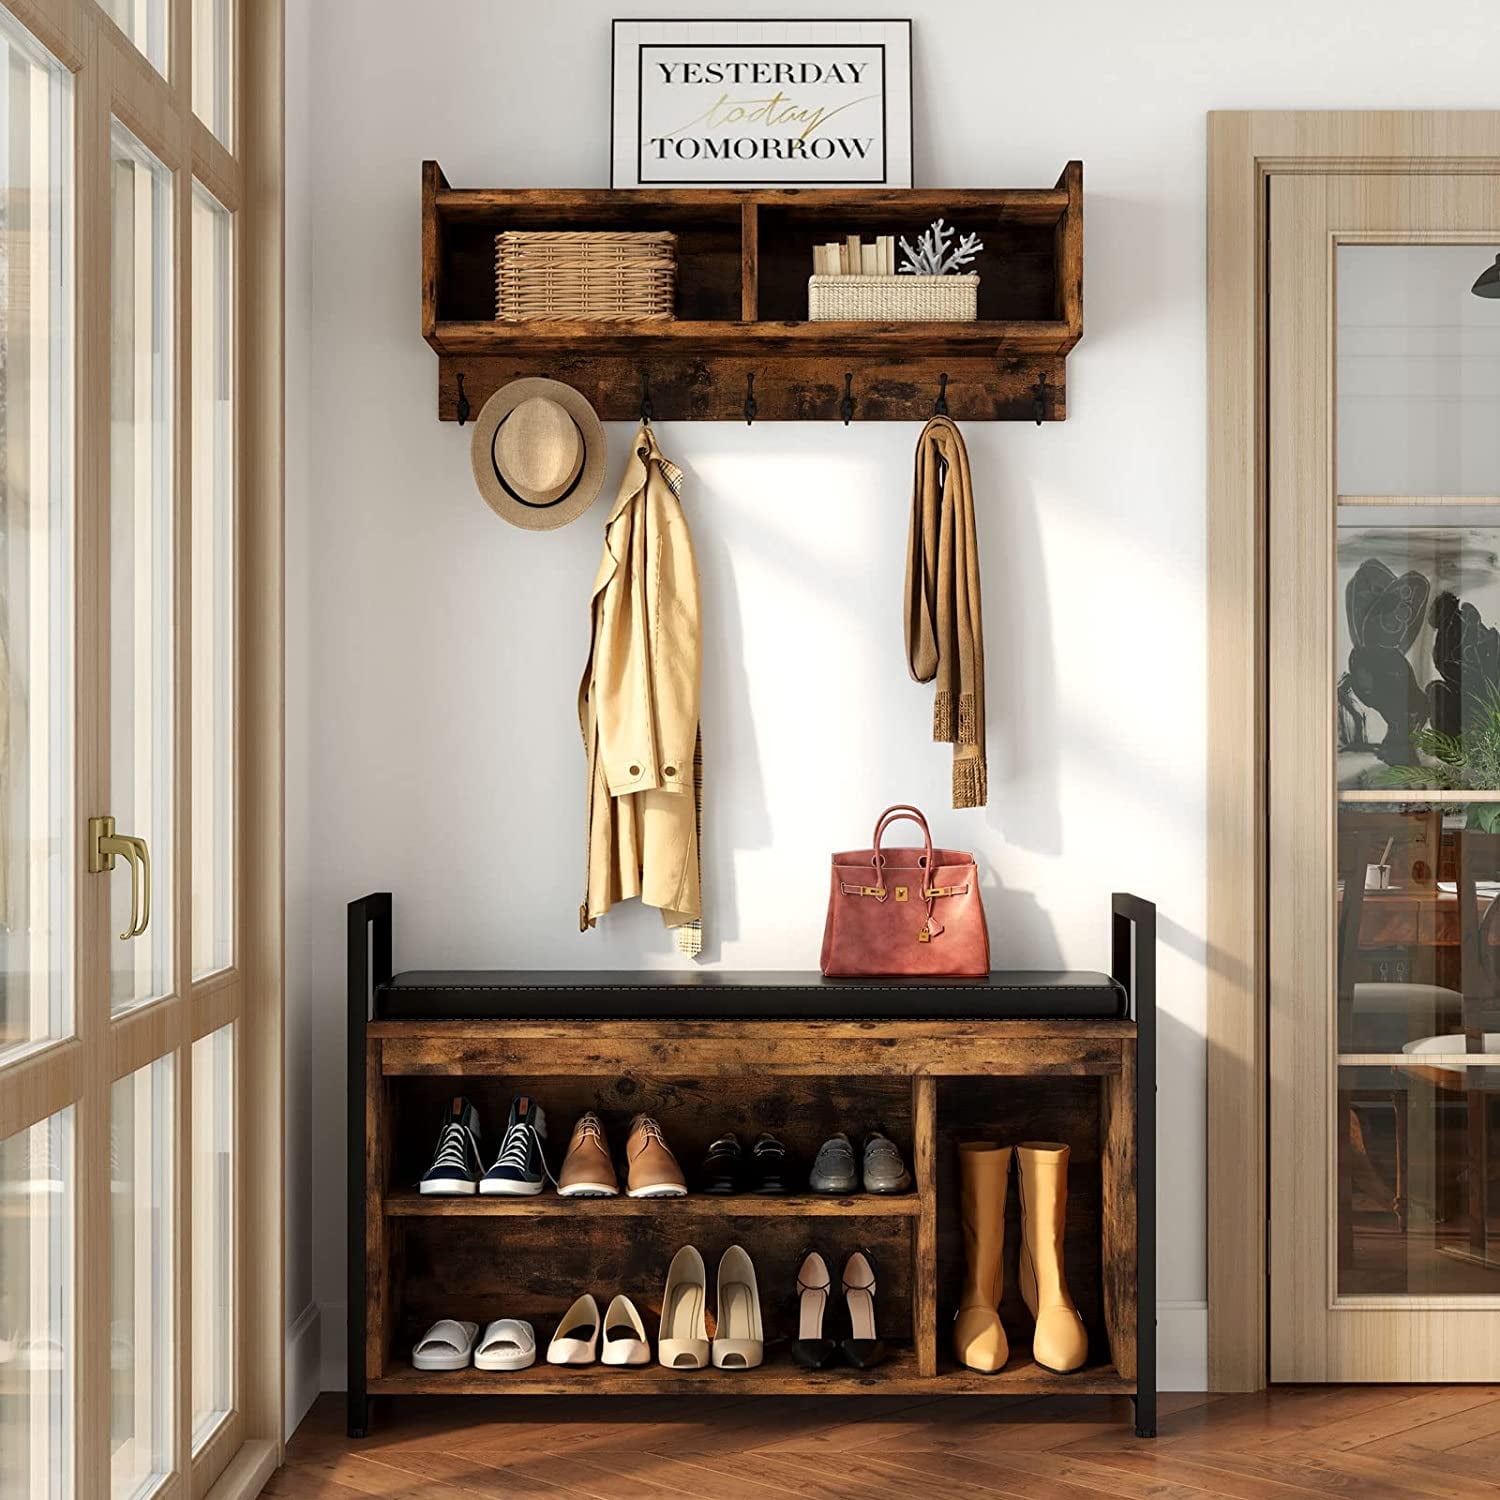 YINTATECH Industrial Entryway Hall Tree Garment Coat Rack with Shoe Bench, Storage Shelves and 7 Hooks for Hallway, Living Room, Bedroom, Rustic Brown